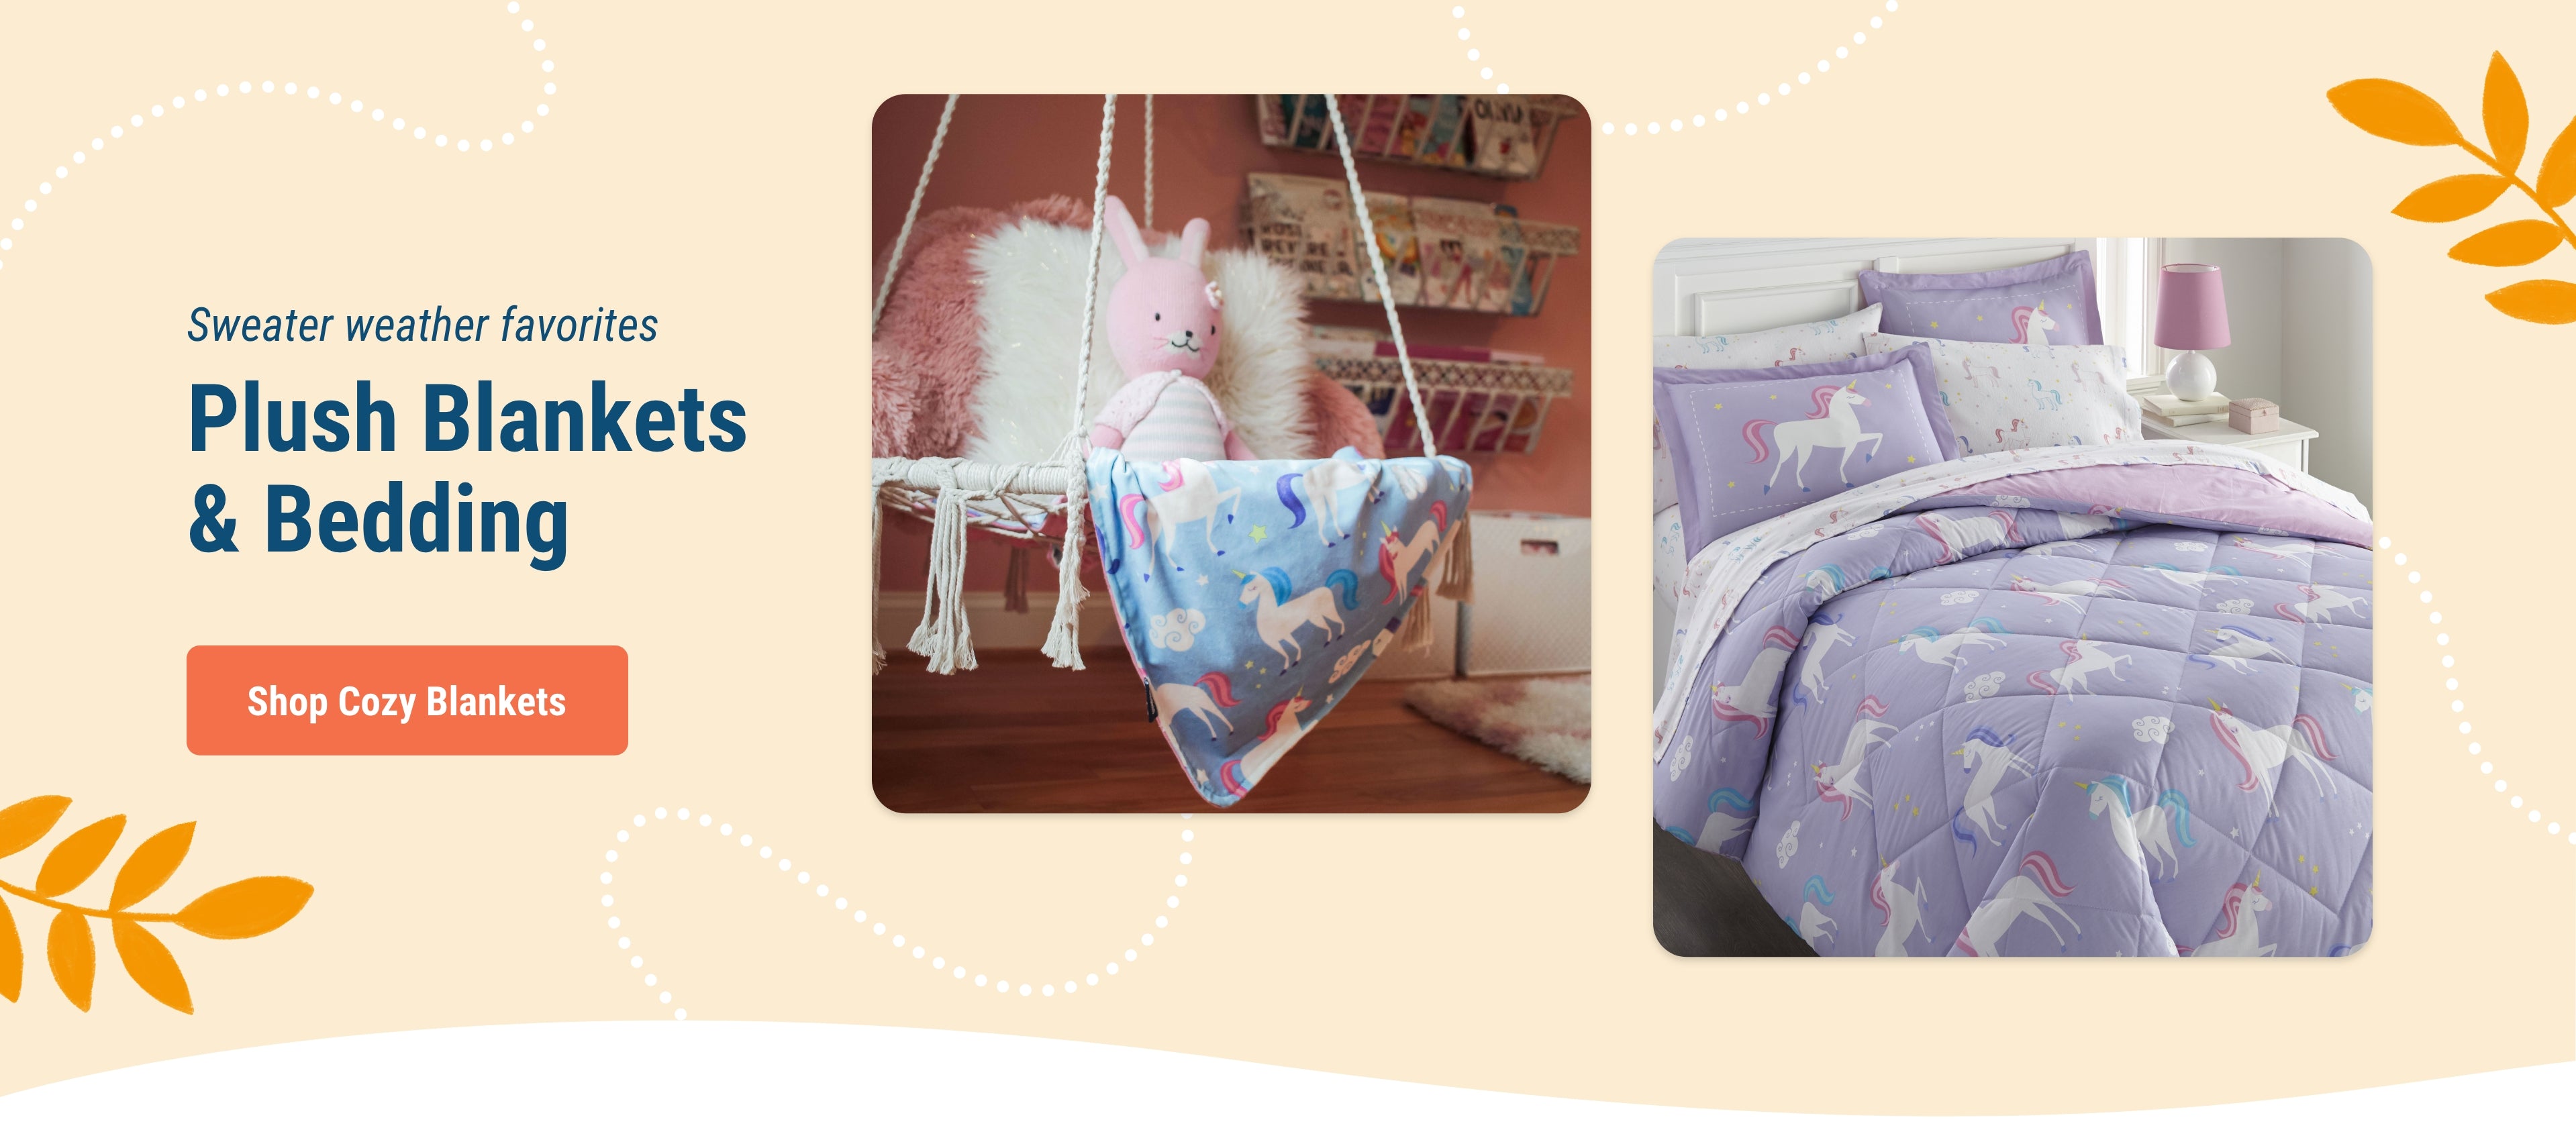 Sweater weather favorites. Plush blankets and Bedding. Link to Shop Cozy Blankets. Image of unicorn plush blanket and matching bedding set